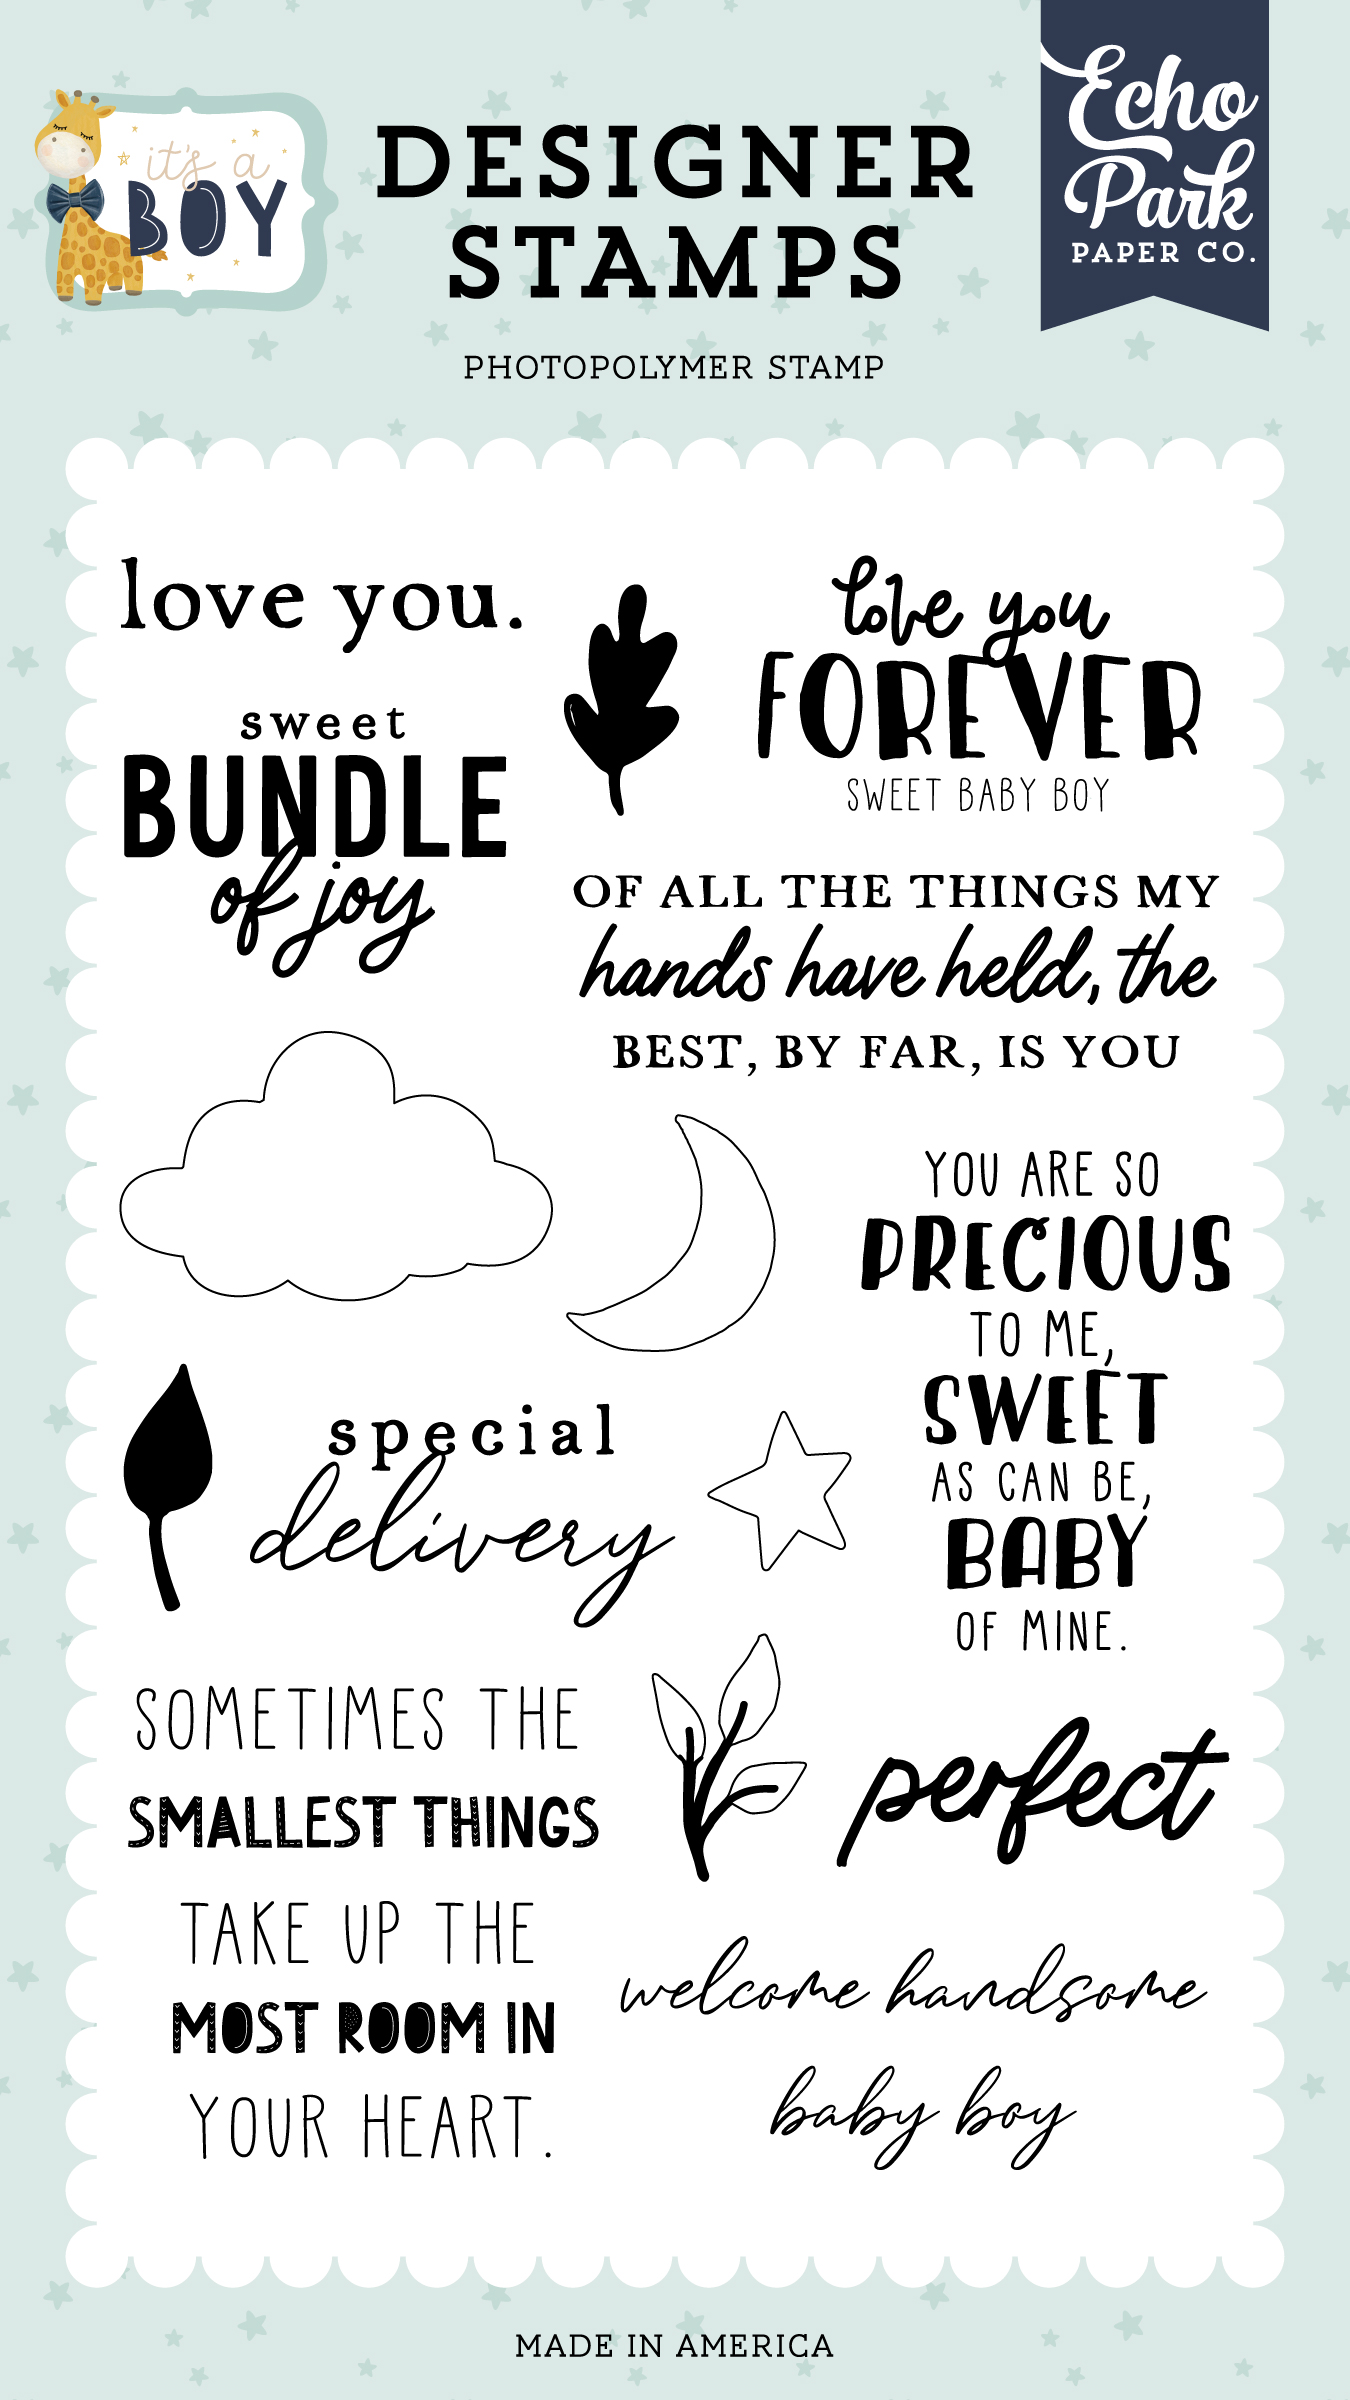 Love Notes: I Cross My Heart Stamp Set - Echo Park Paper Co.